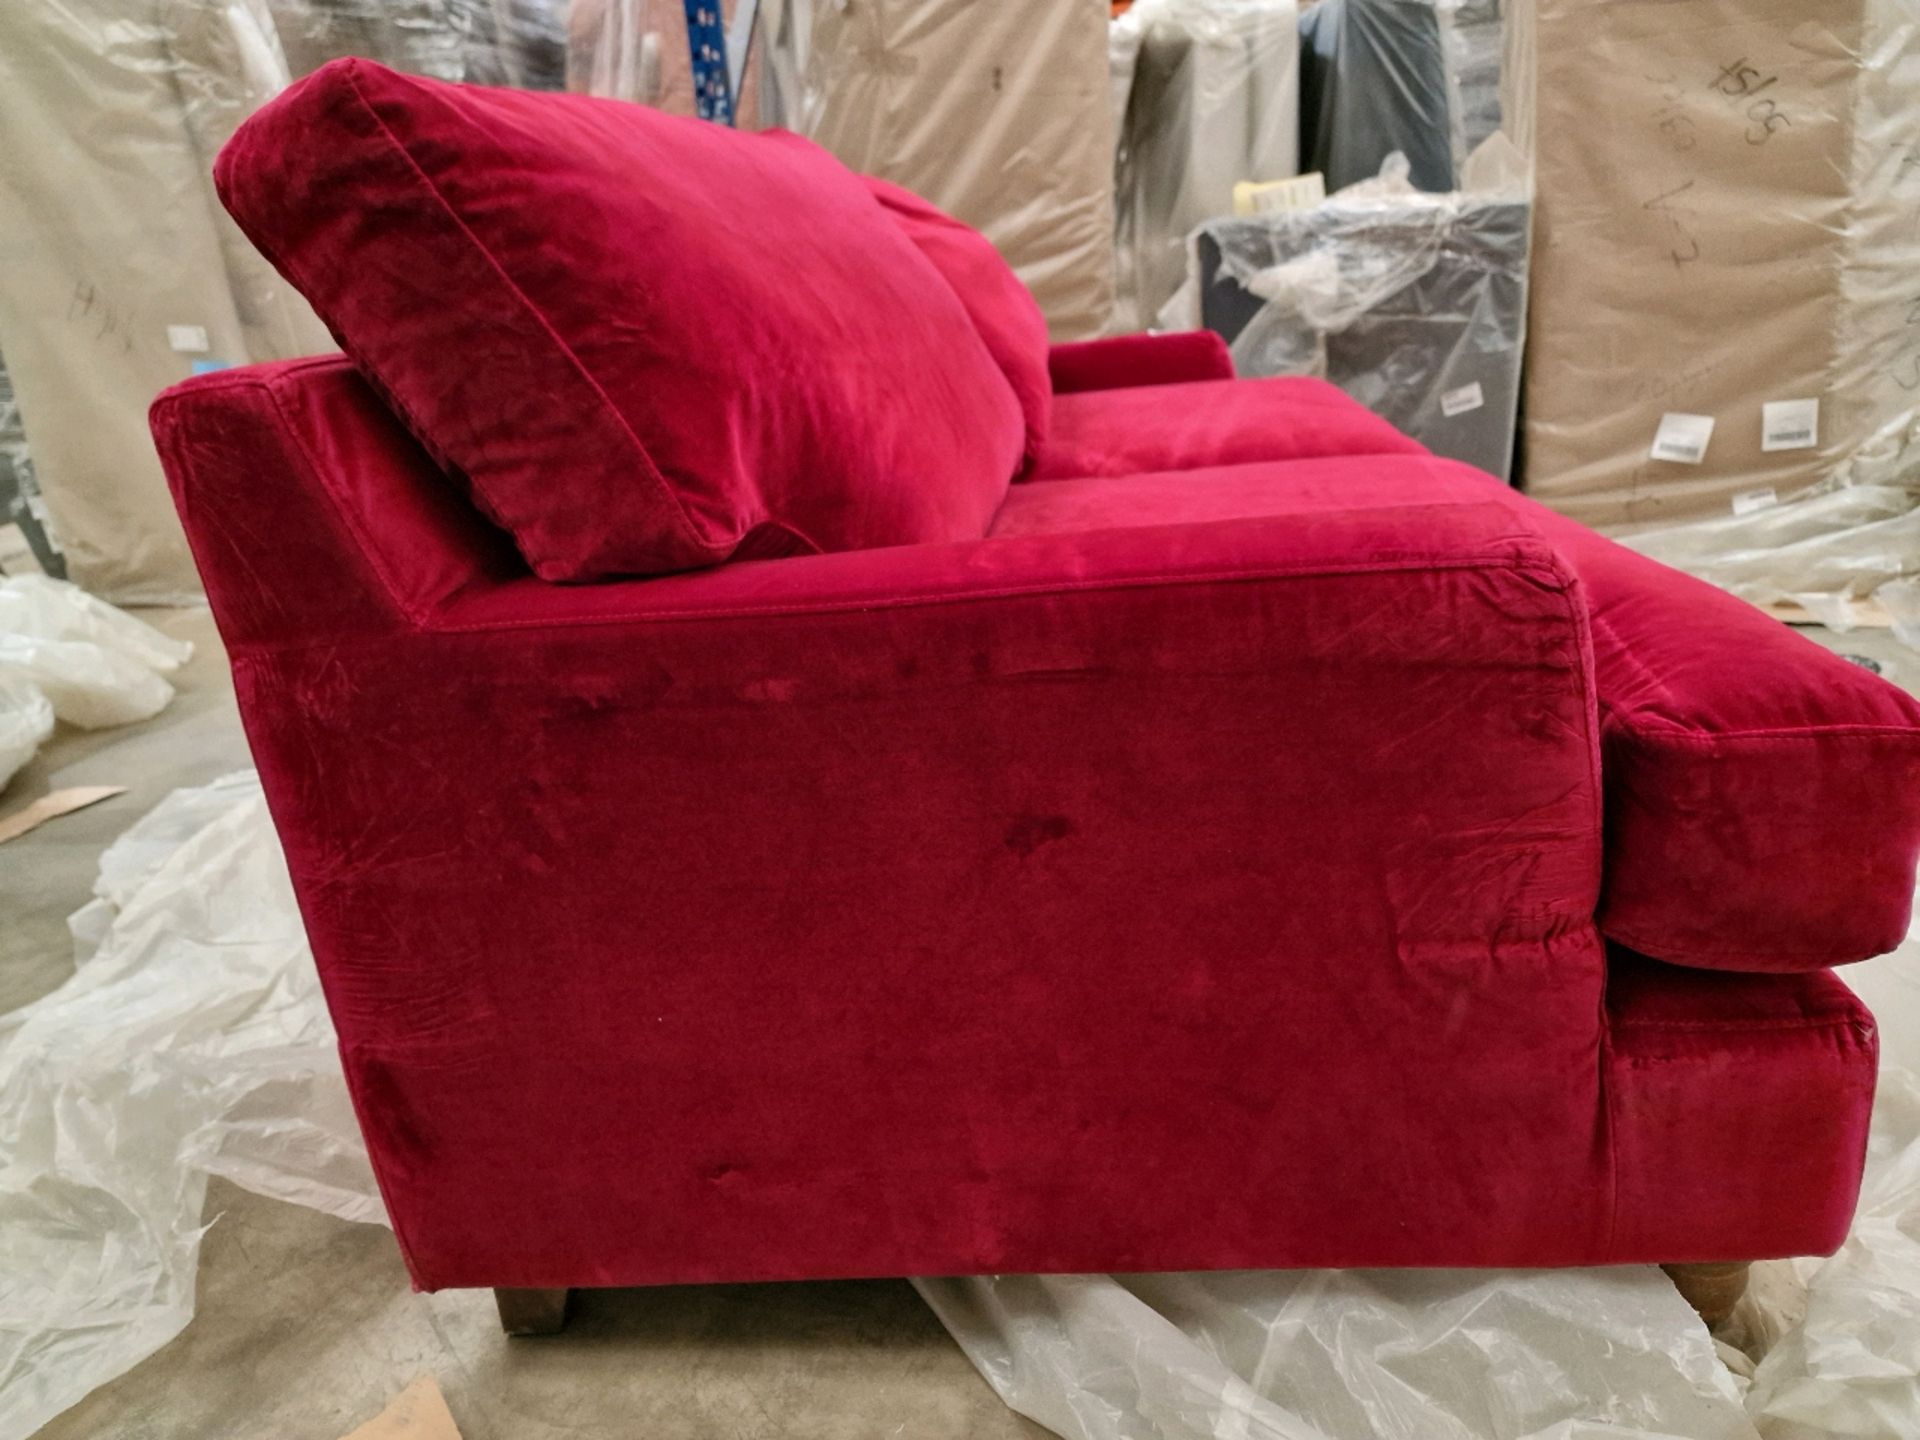 Crushed velvet red 4 seater sofa bed - Image 7 of 10